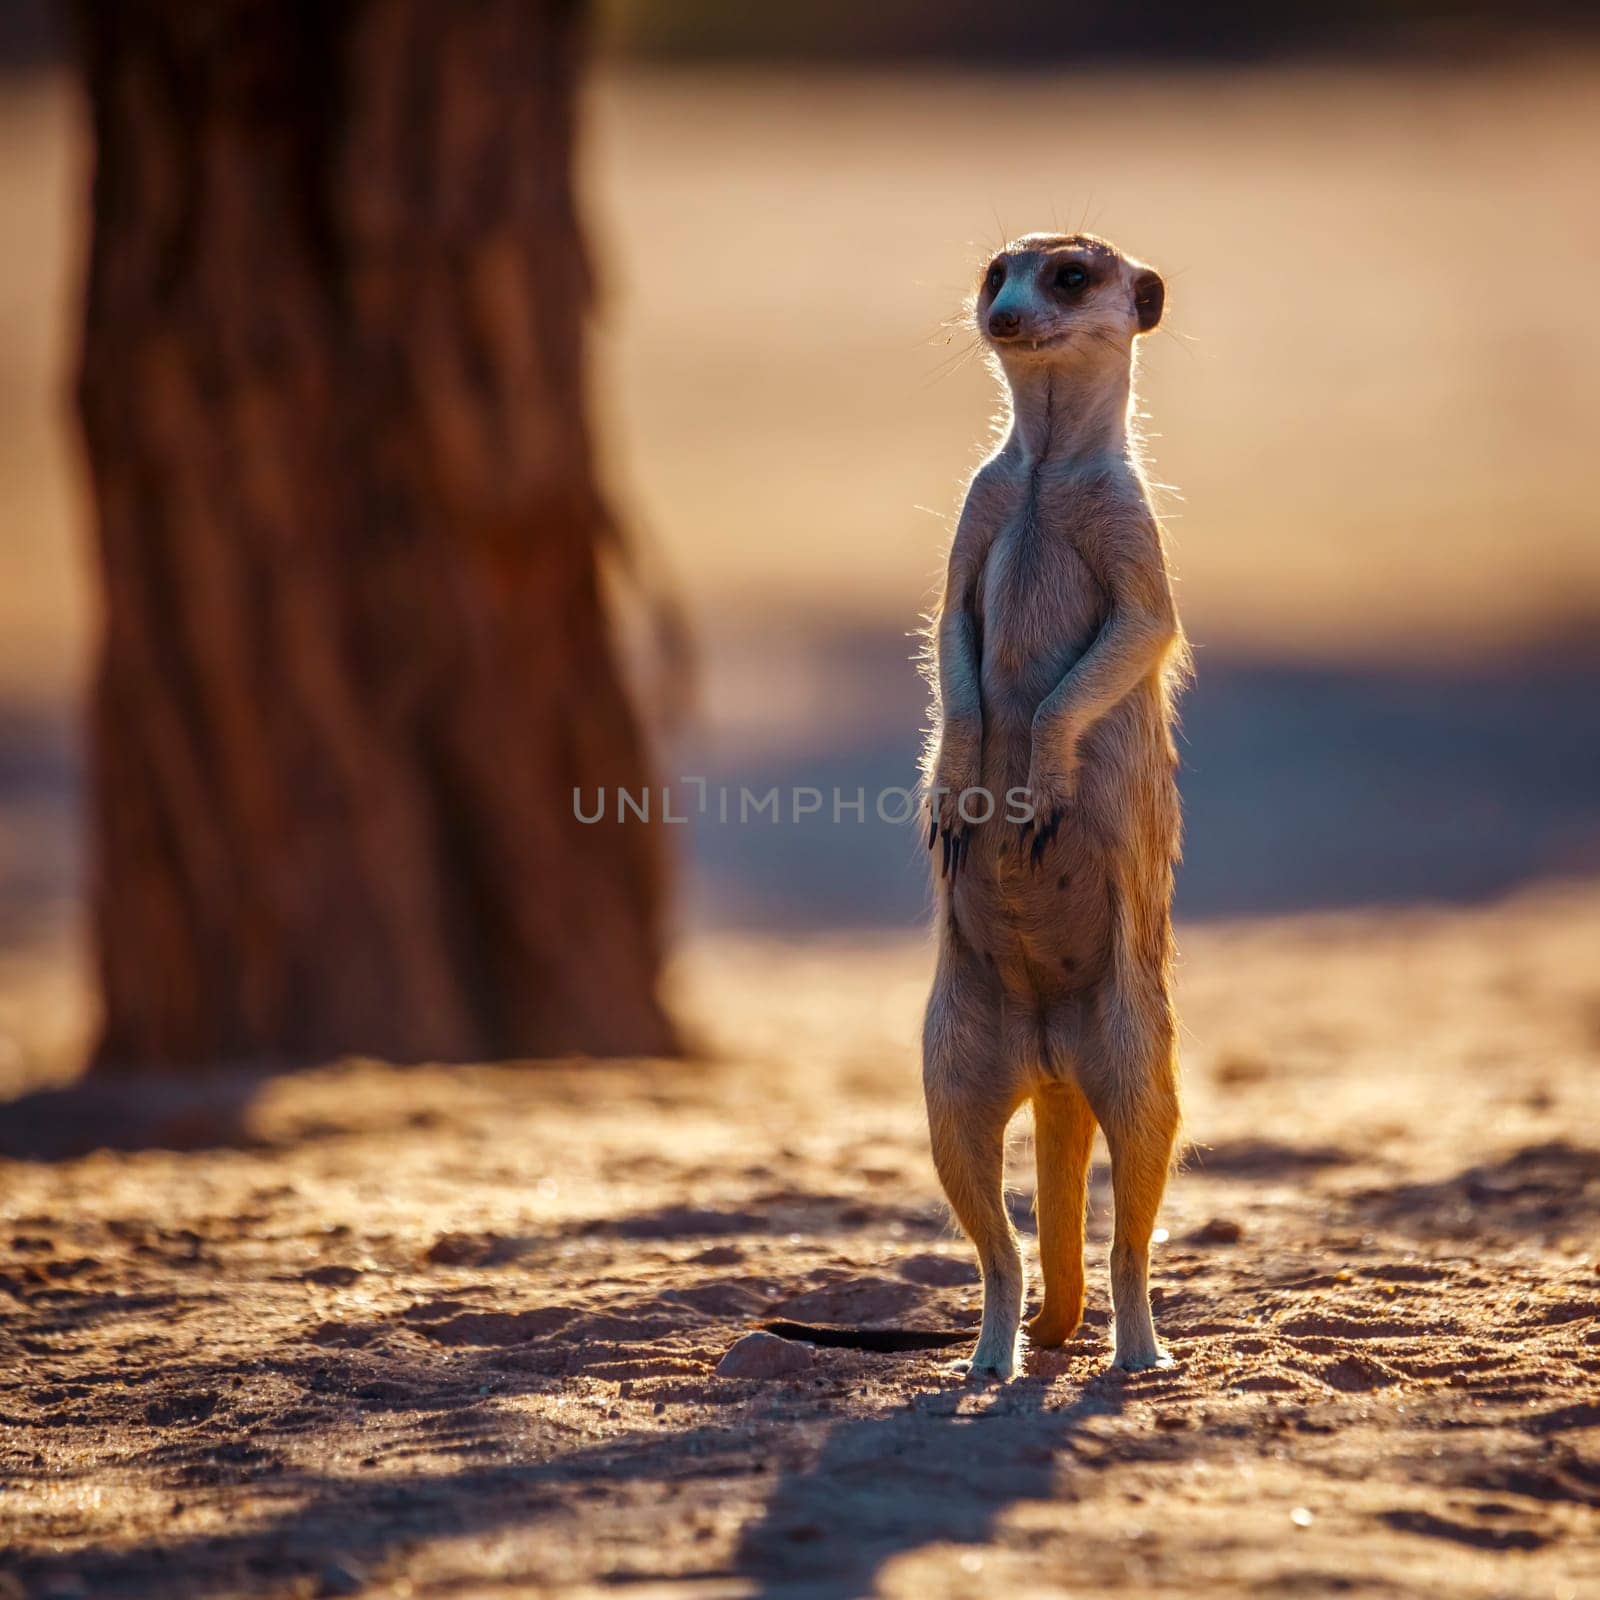 Meerkats in Kgalagadi transfrontier park, South Africa by PACOCOMO